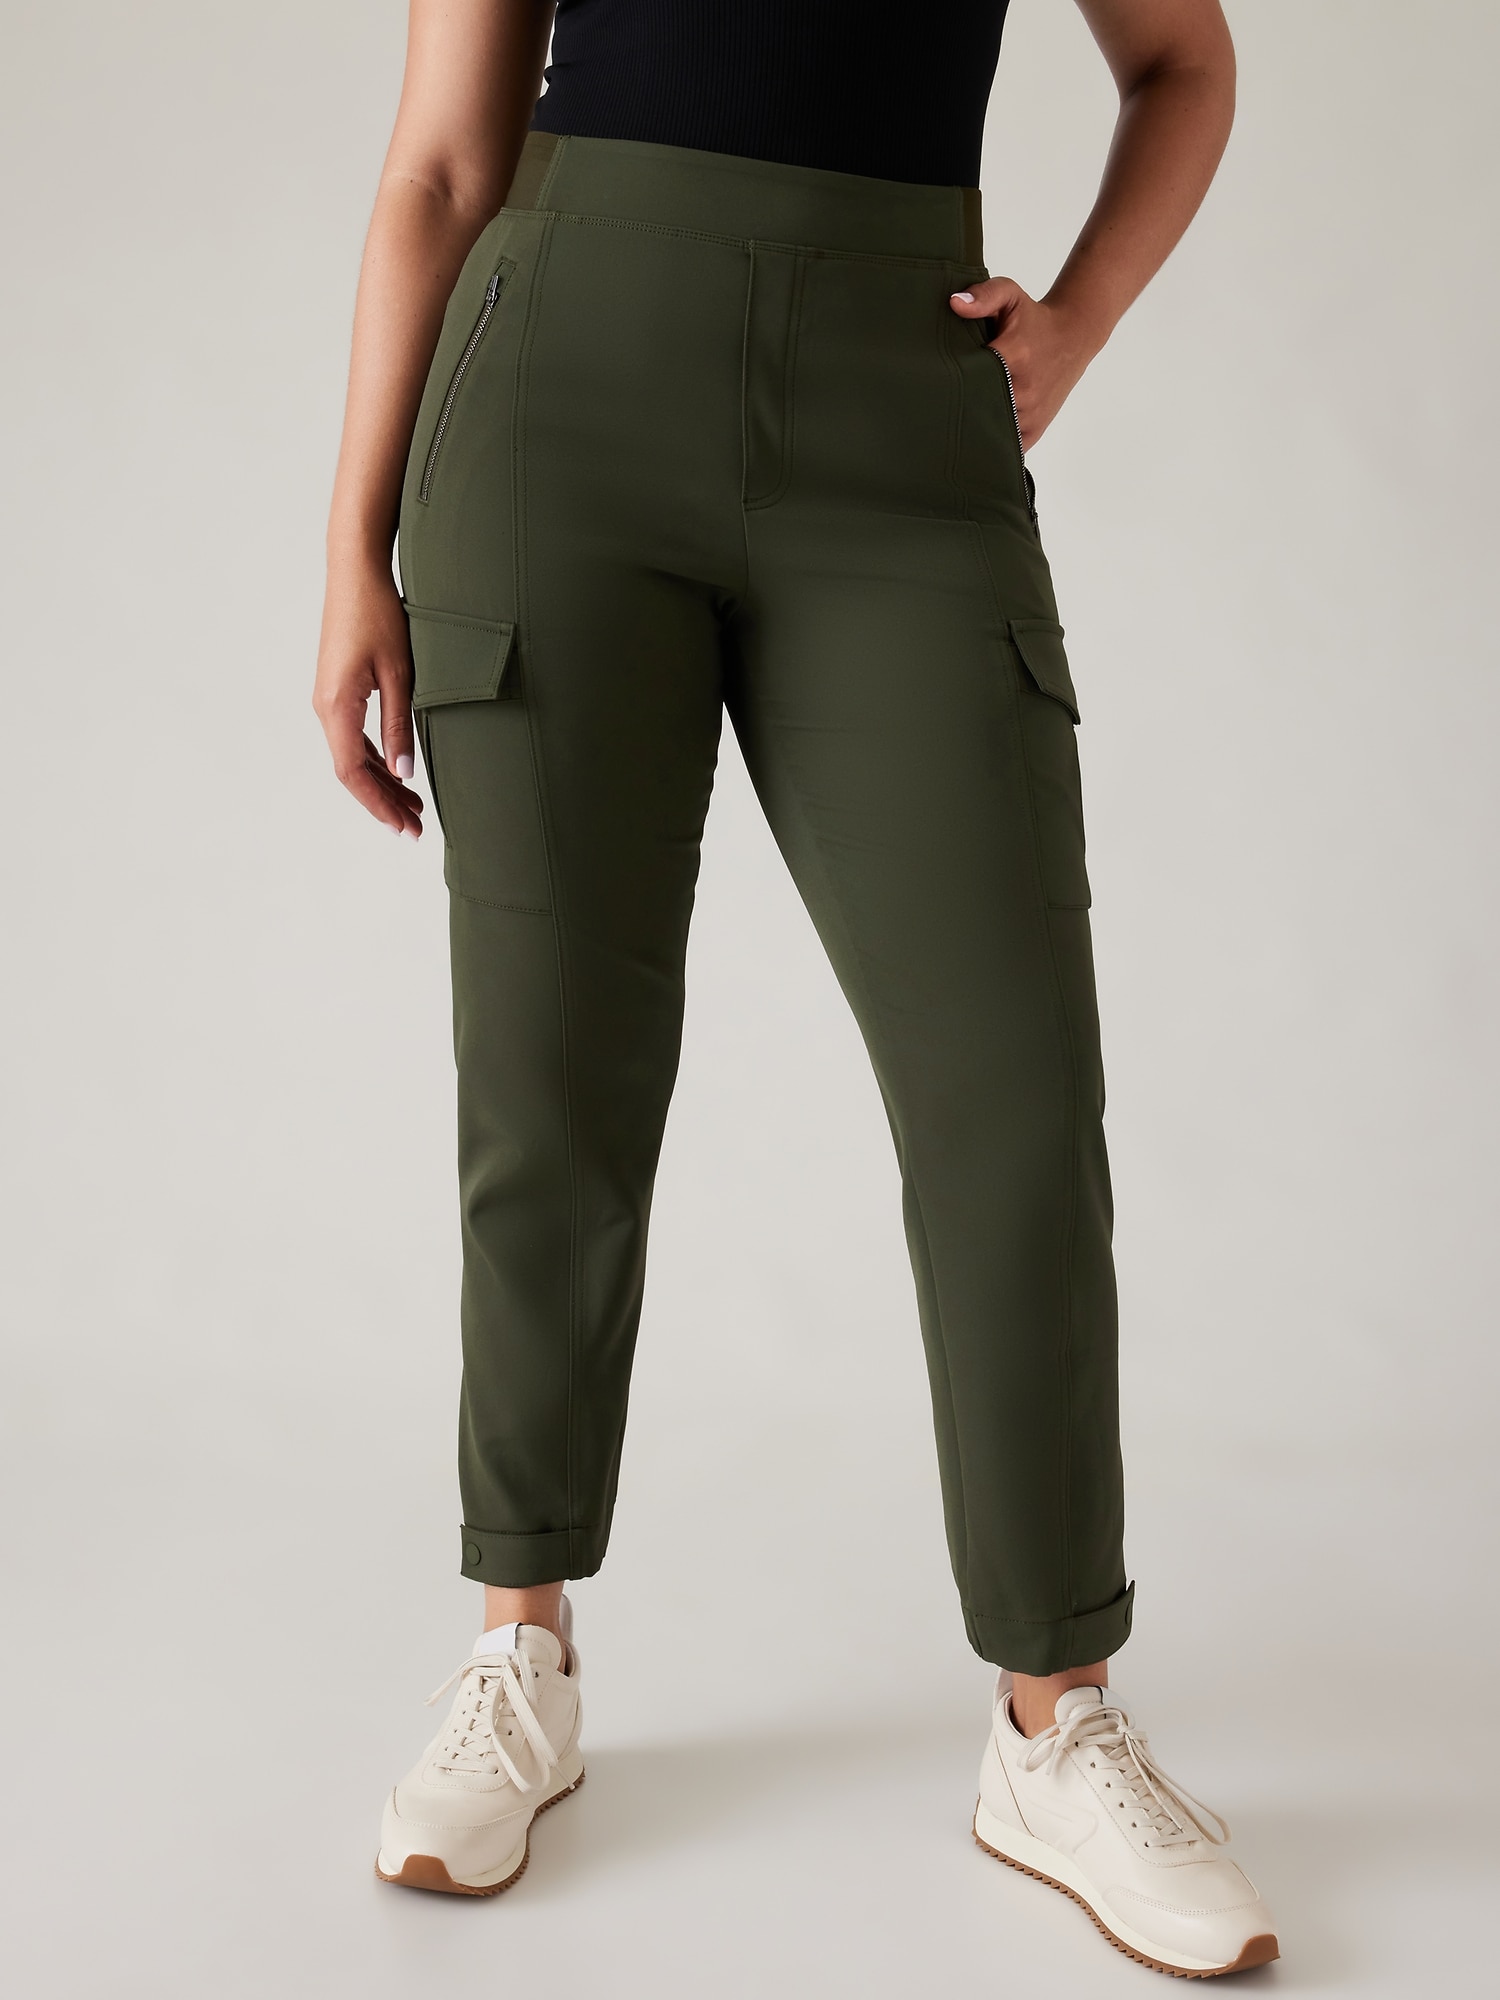 Cargo Sweatpants for Women Tall Petite high Waisted Plus Size